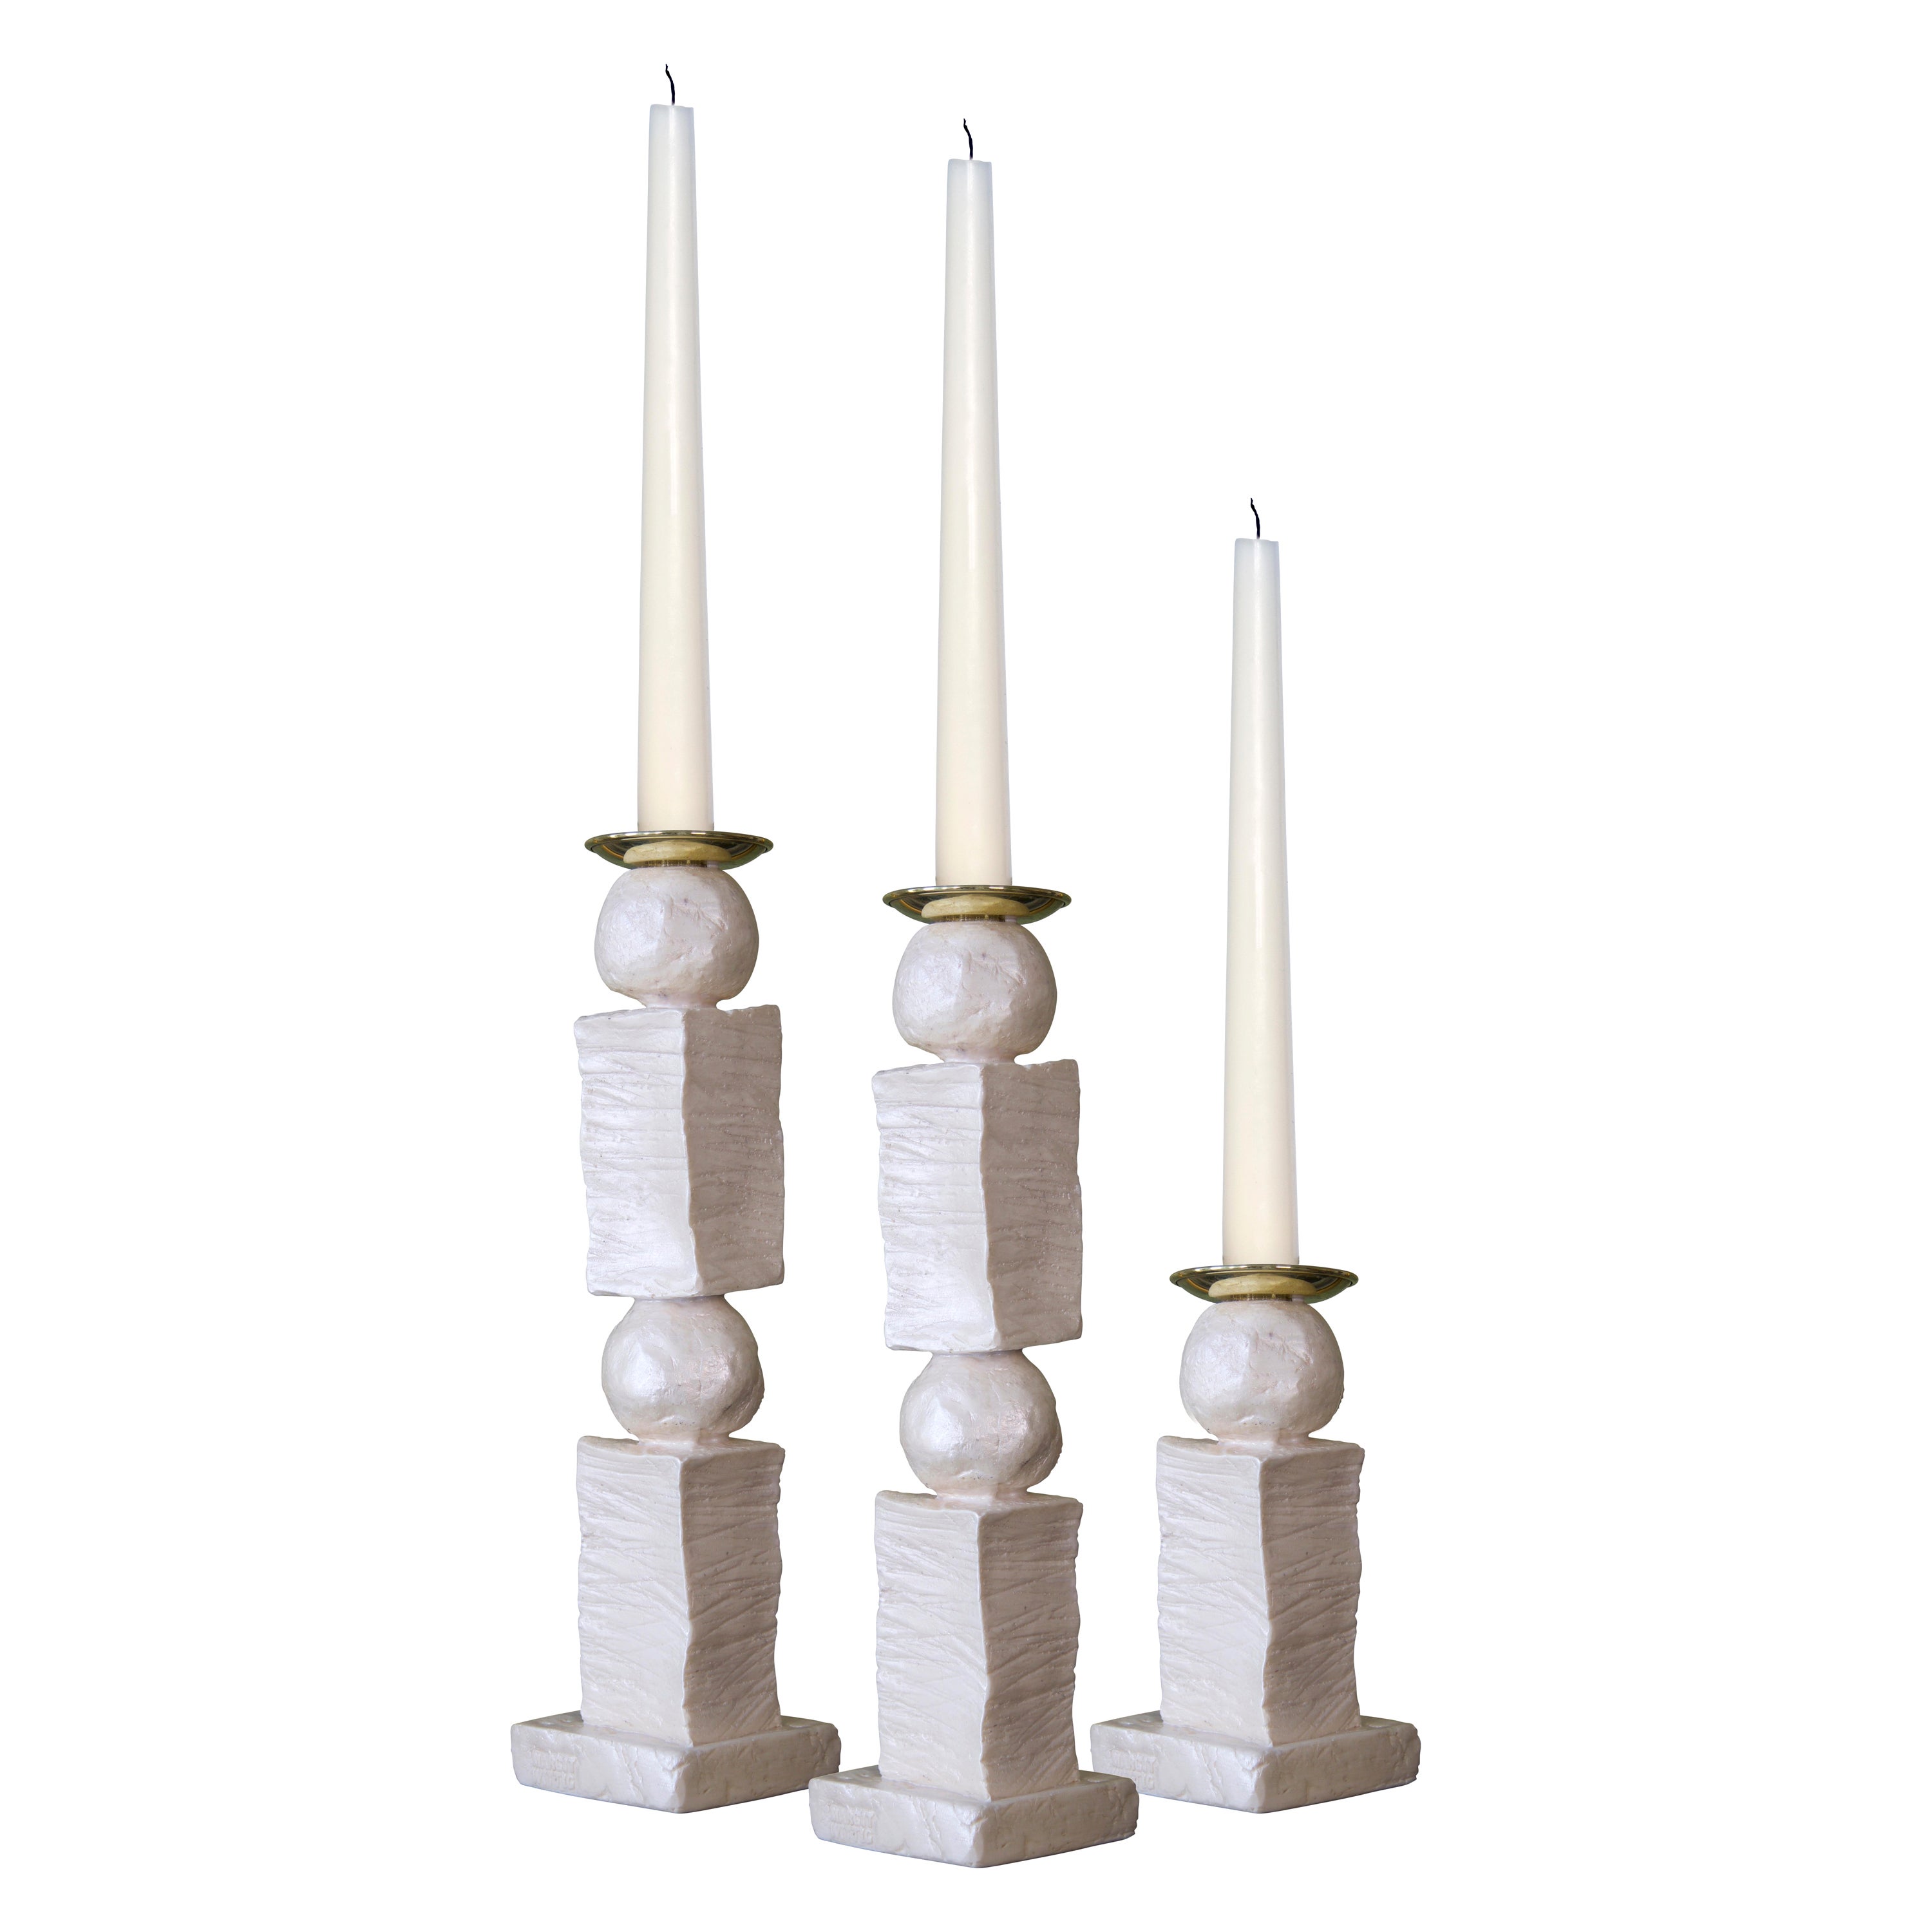 Block & Pearl Sculpted Contemporary White Candlestick Set by Margit Wittig